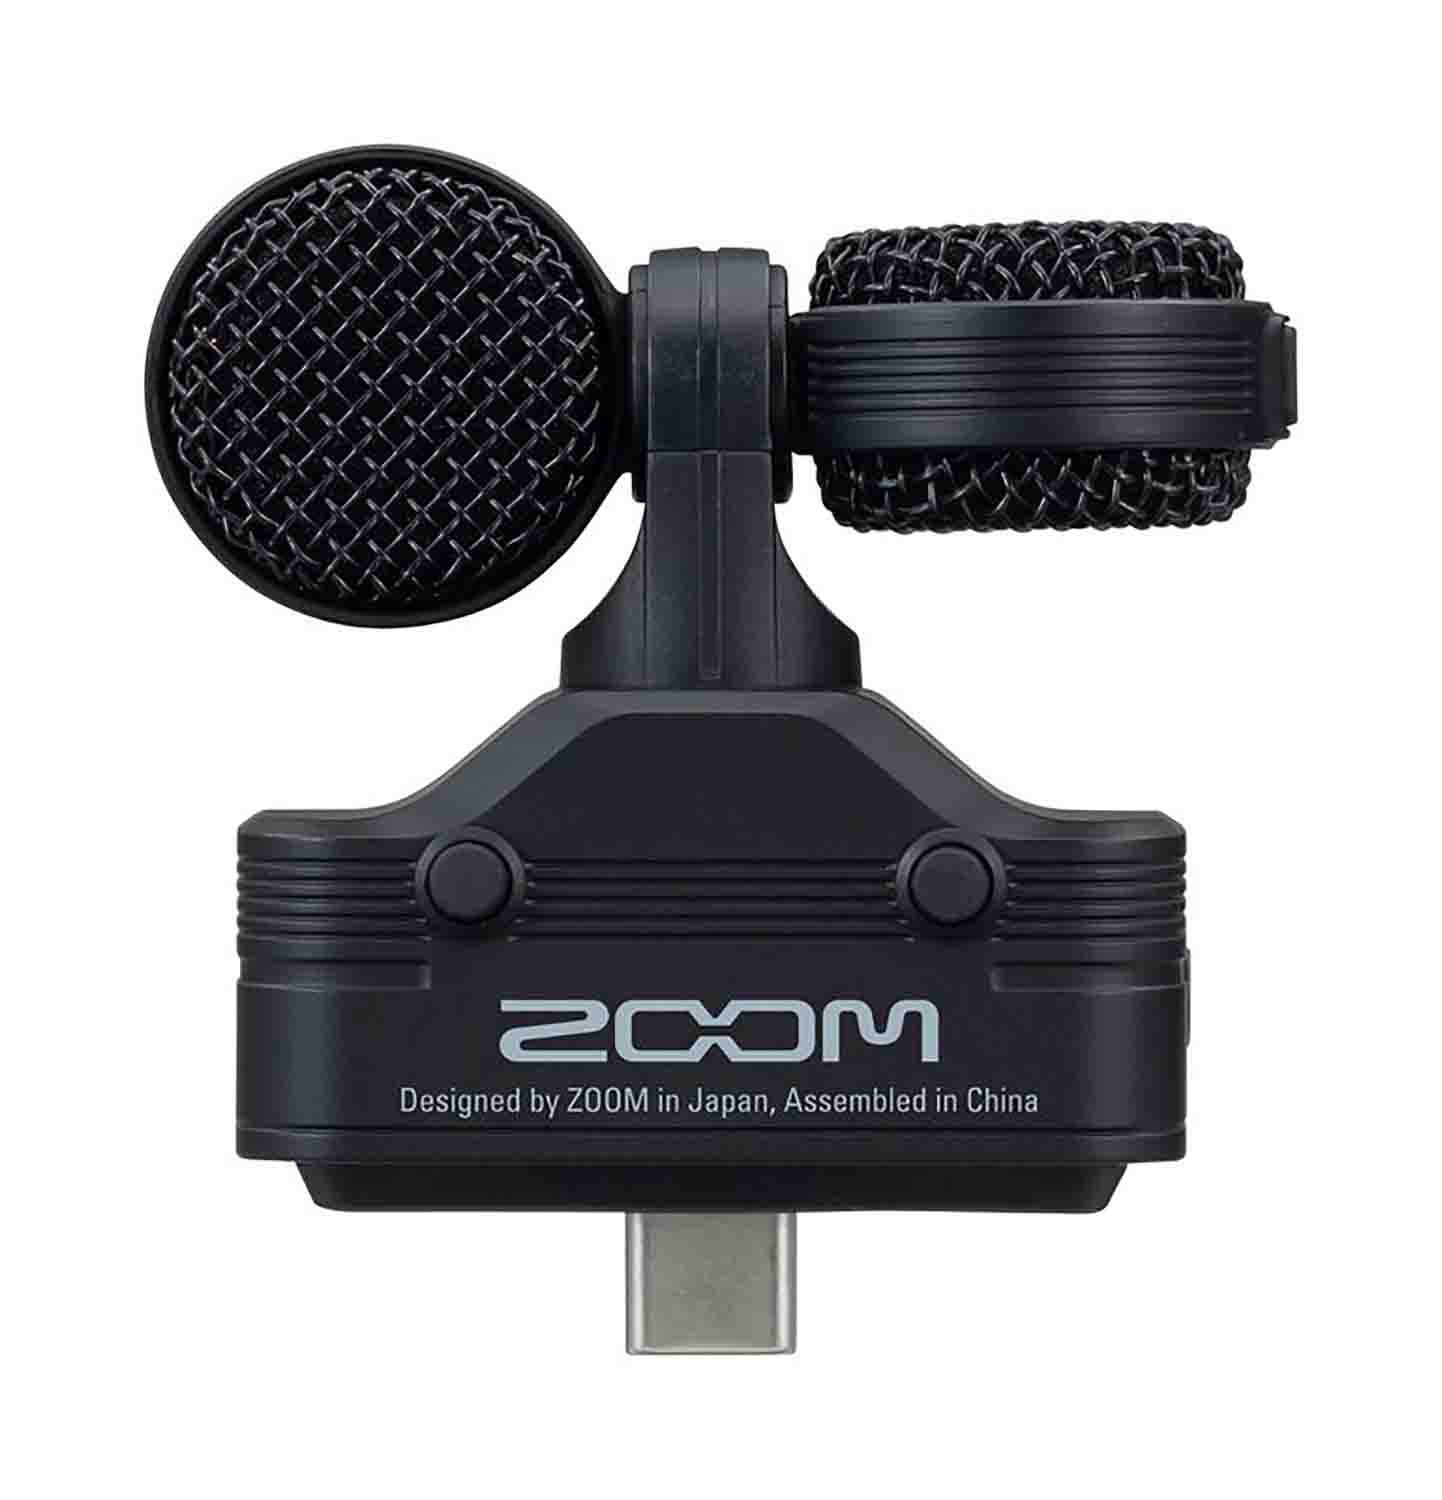 Zoom AM7 Stereo Microphone for Android Devices - Hollywood DJ